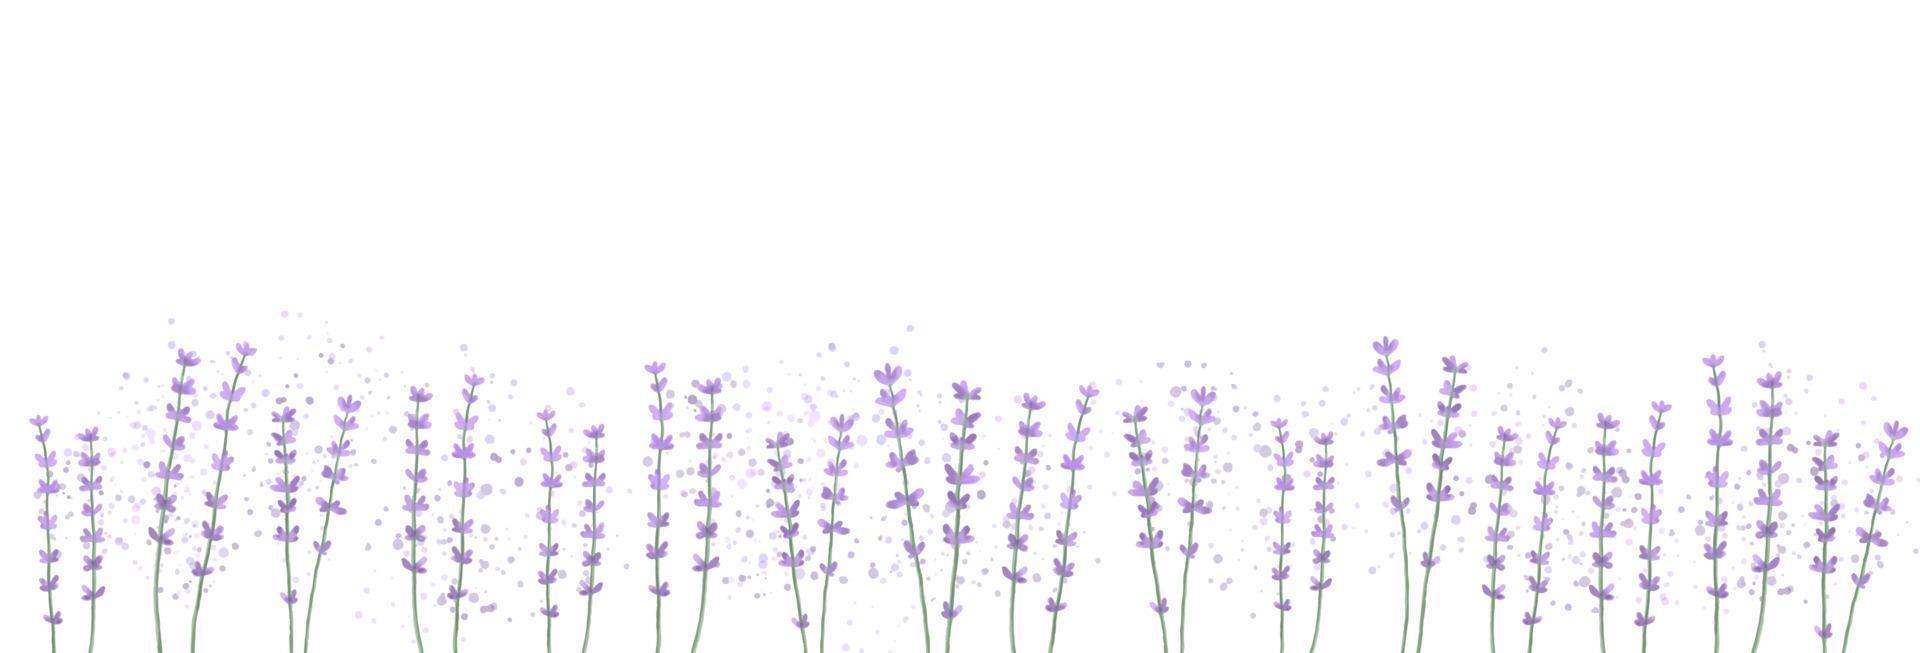 Horizontal floral background with lavender flowers. Watercolor vector illustration.